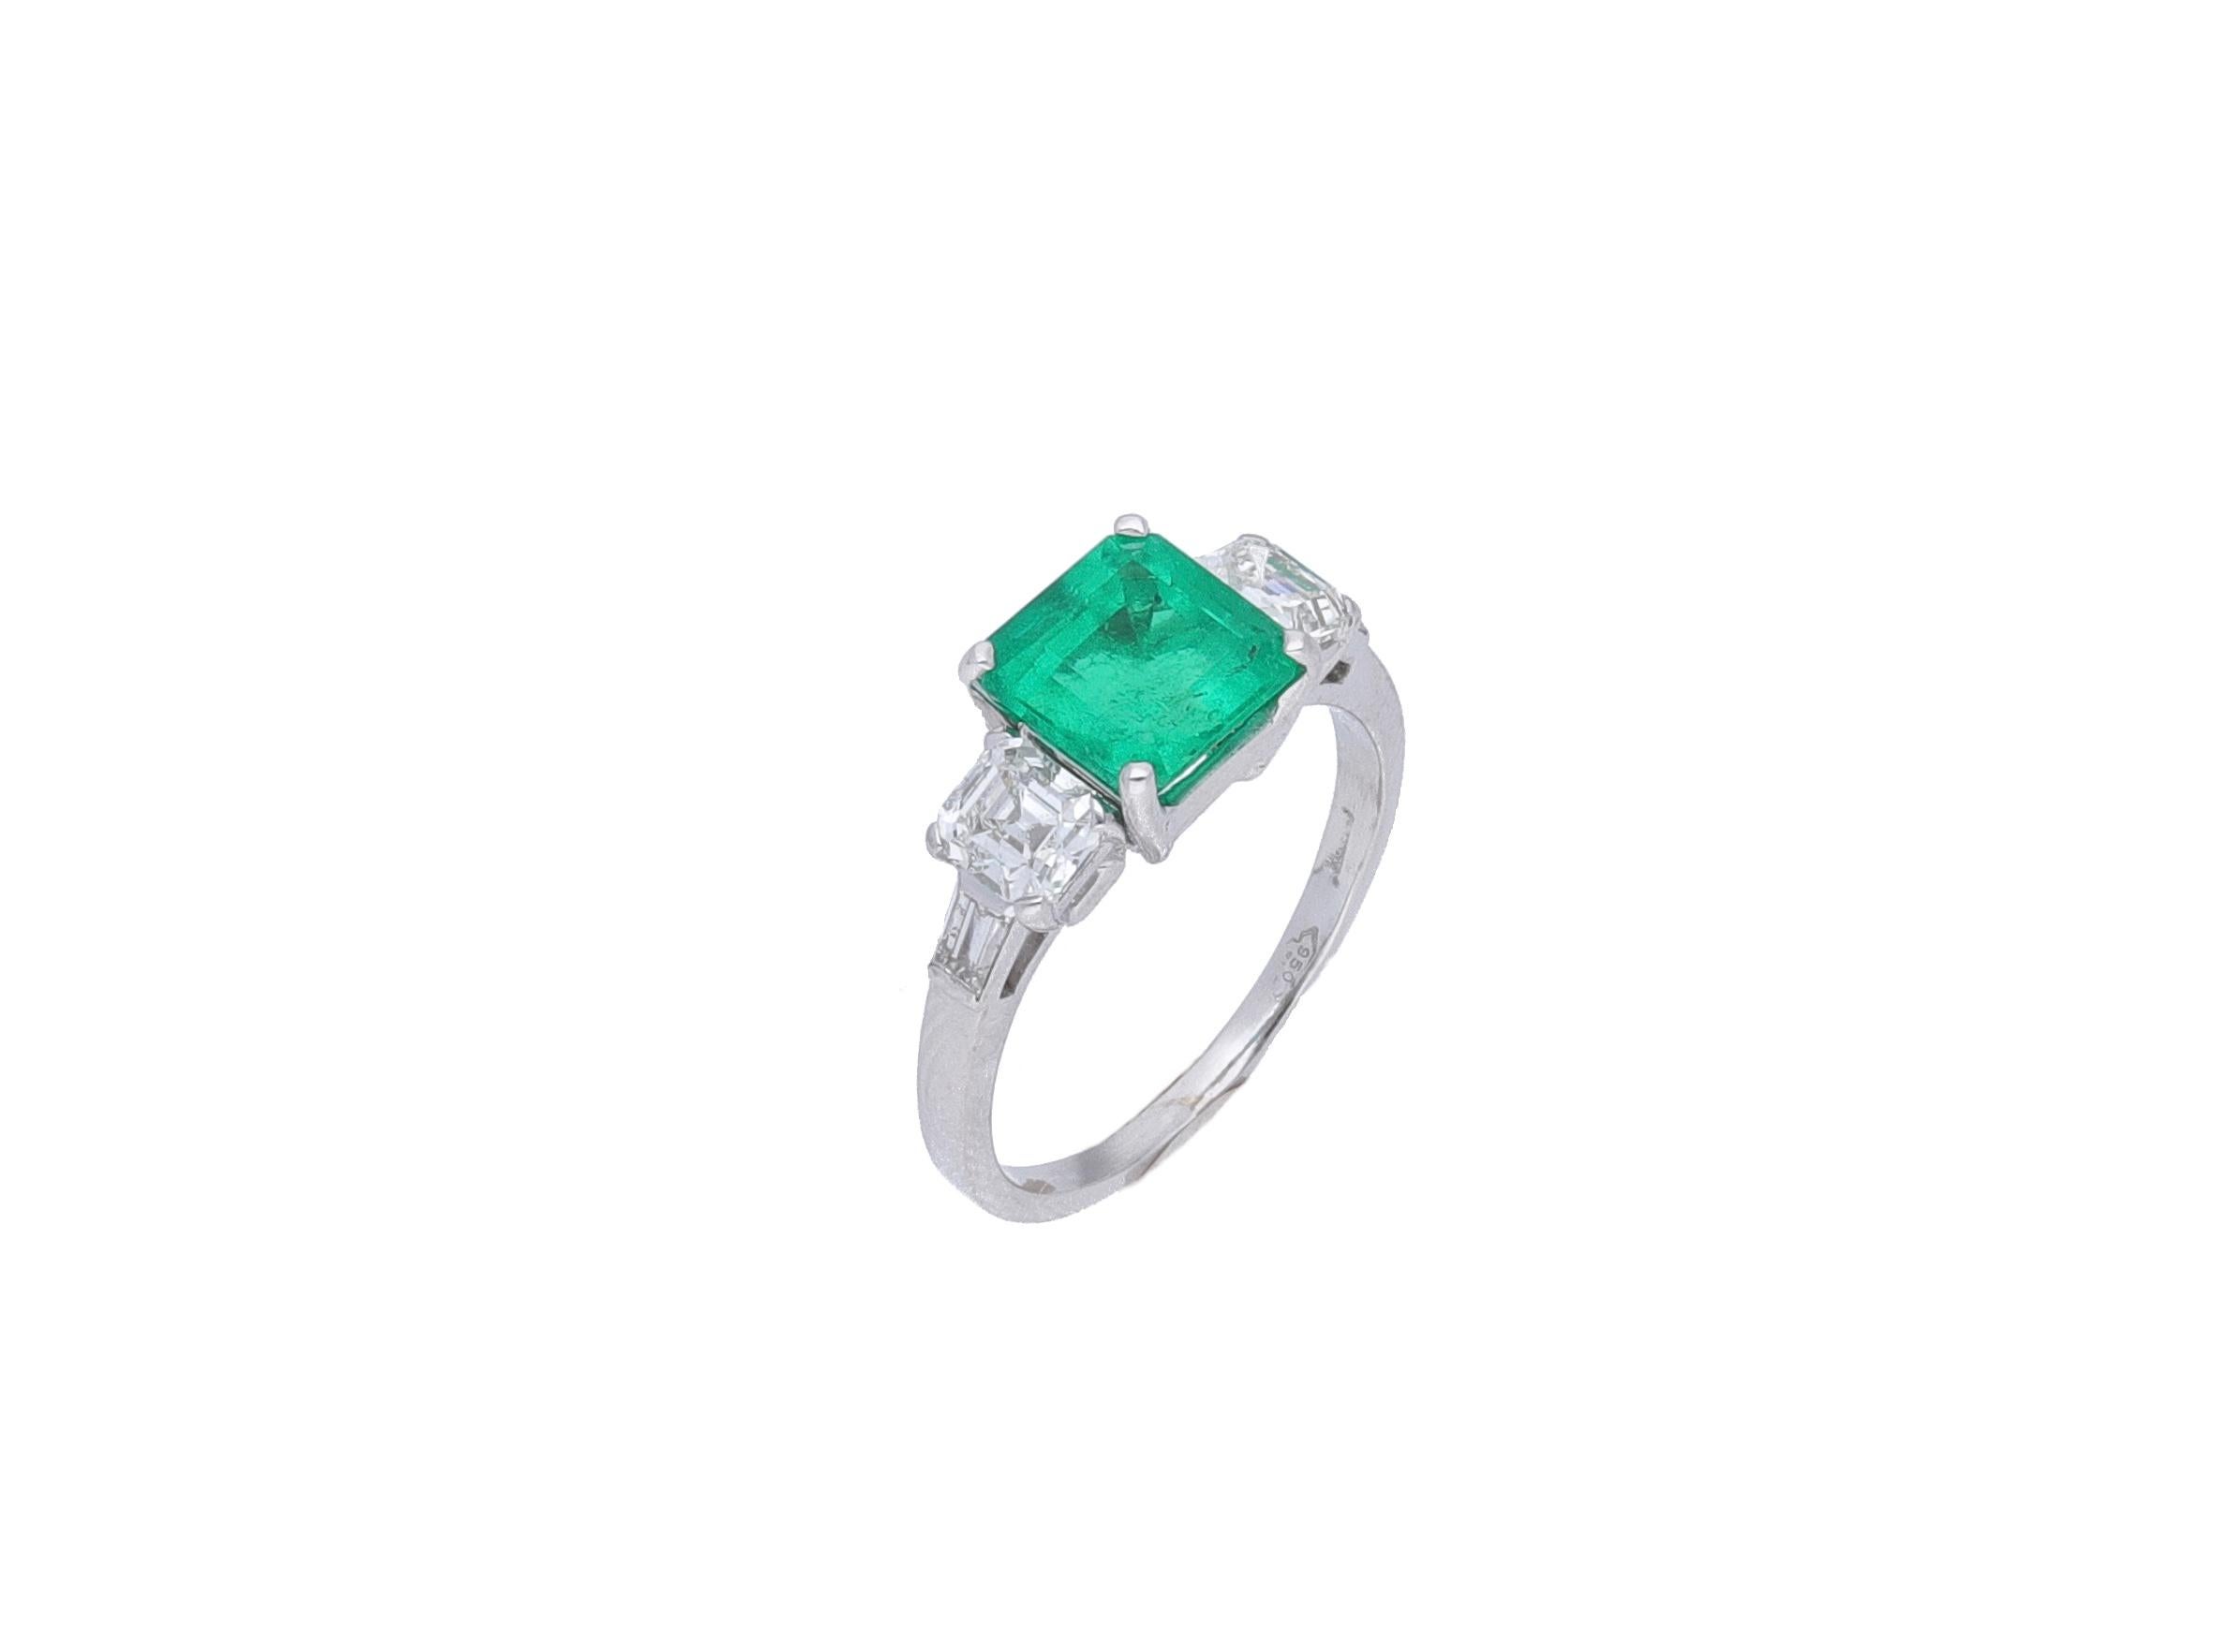 Platinum ring with diamonds and emerald signed by Bulgari.
This classic ring has a 2.20 carat of octagonal-cut Colombian emerald and 0.94 carat of shoulder octagonal-cut diamonds. (GH - VVS - SI1)
This ring comes with the original box.

  